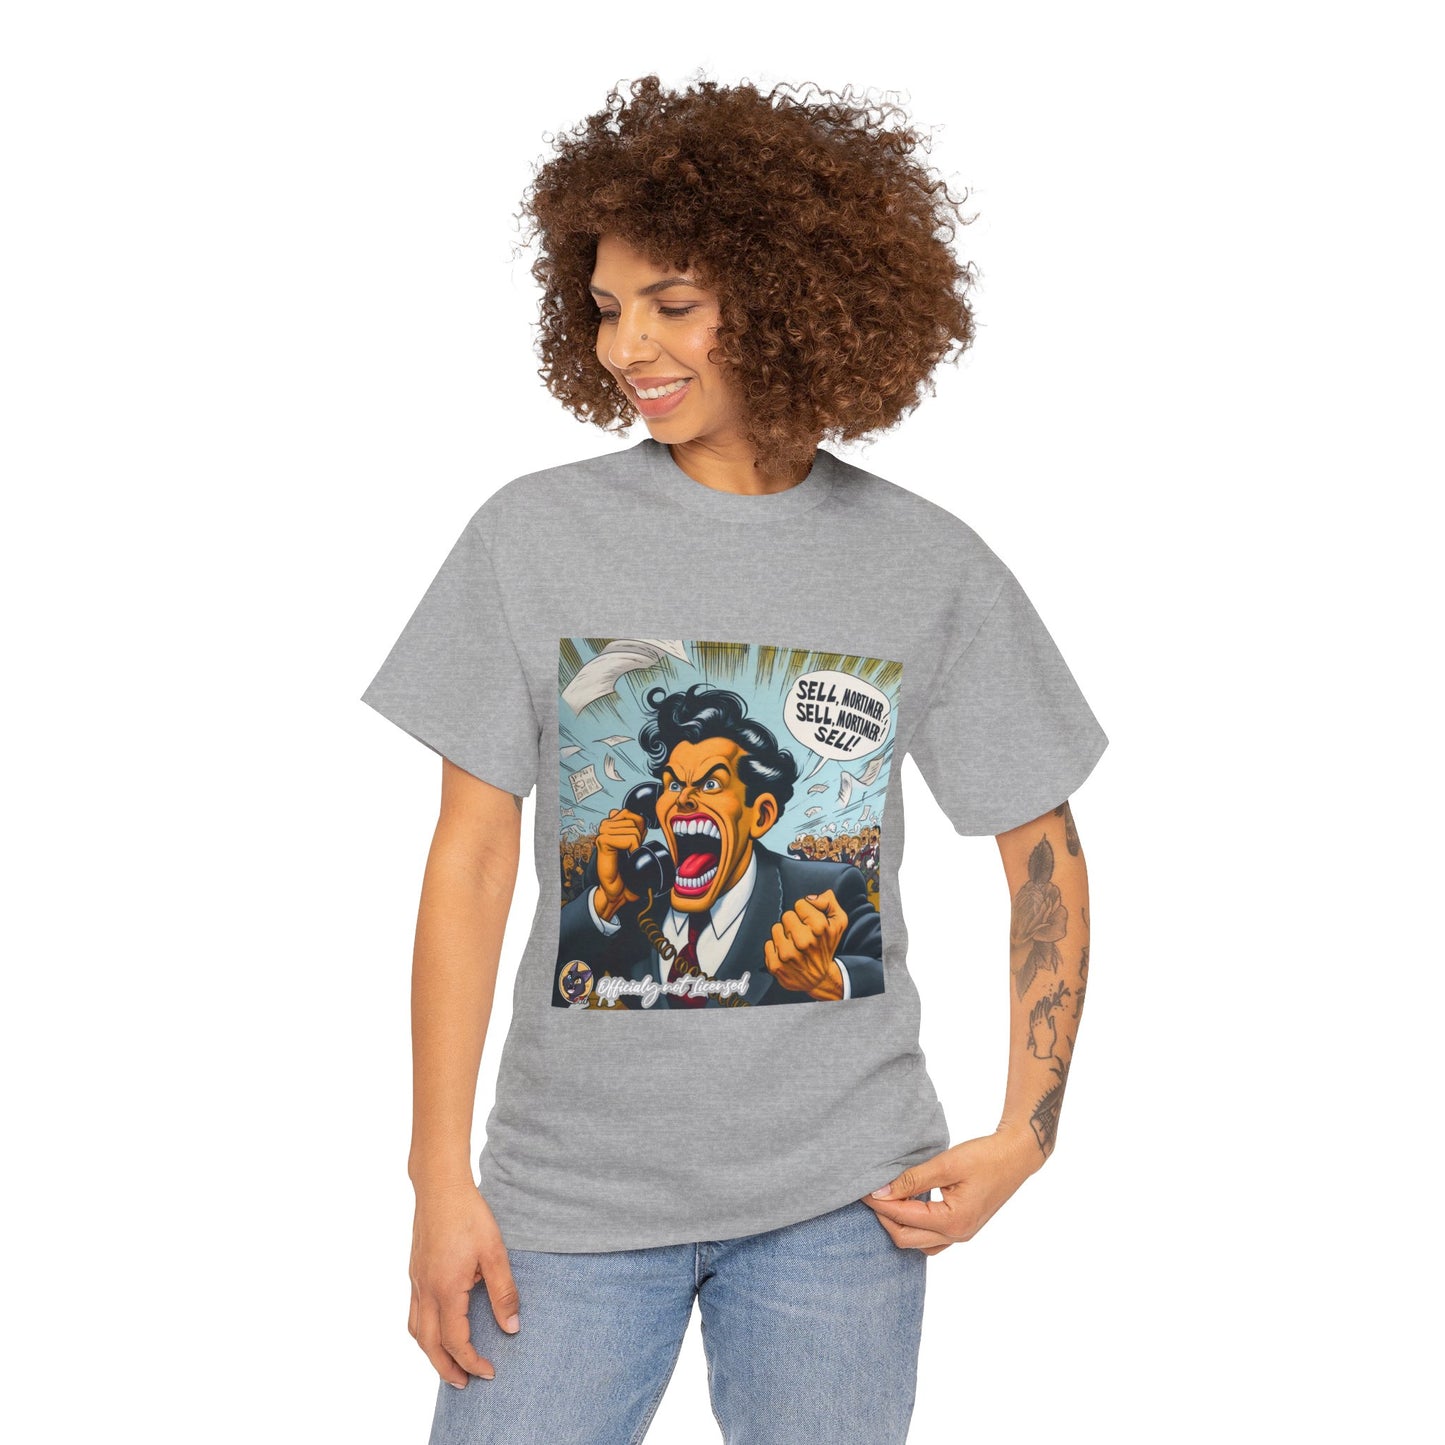 The Authentic Self T-Shirt: Sell, Mortimer! sell, Mortime! sell!